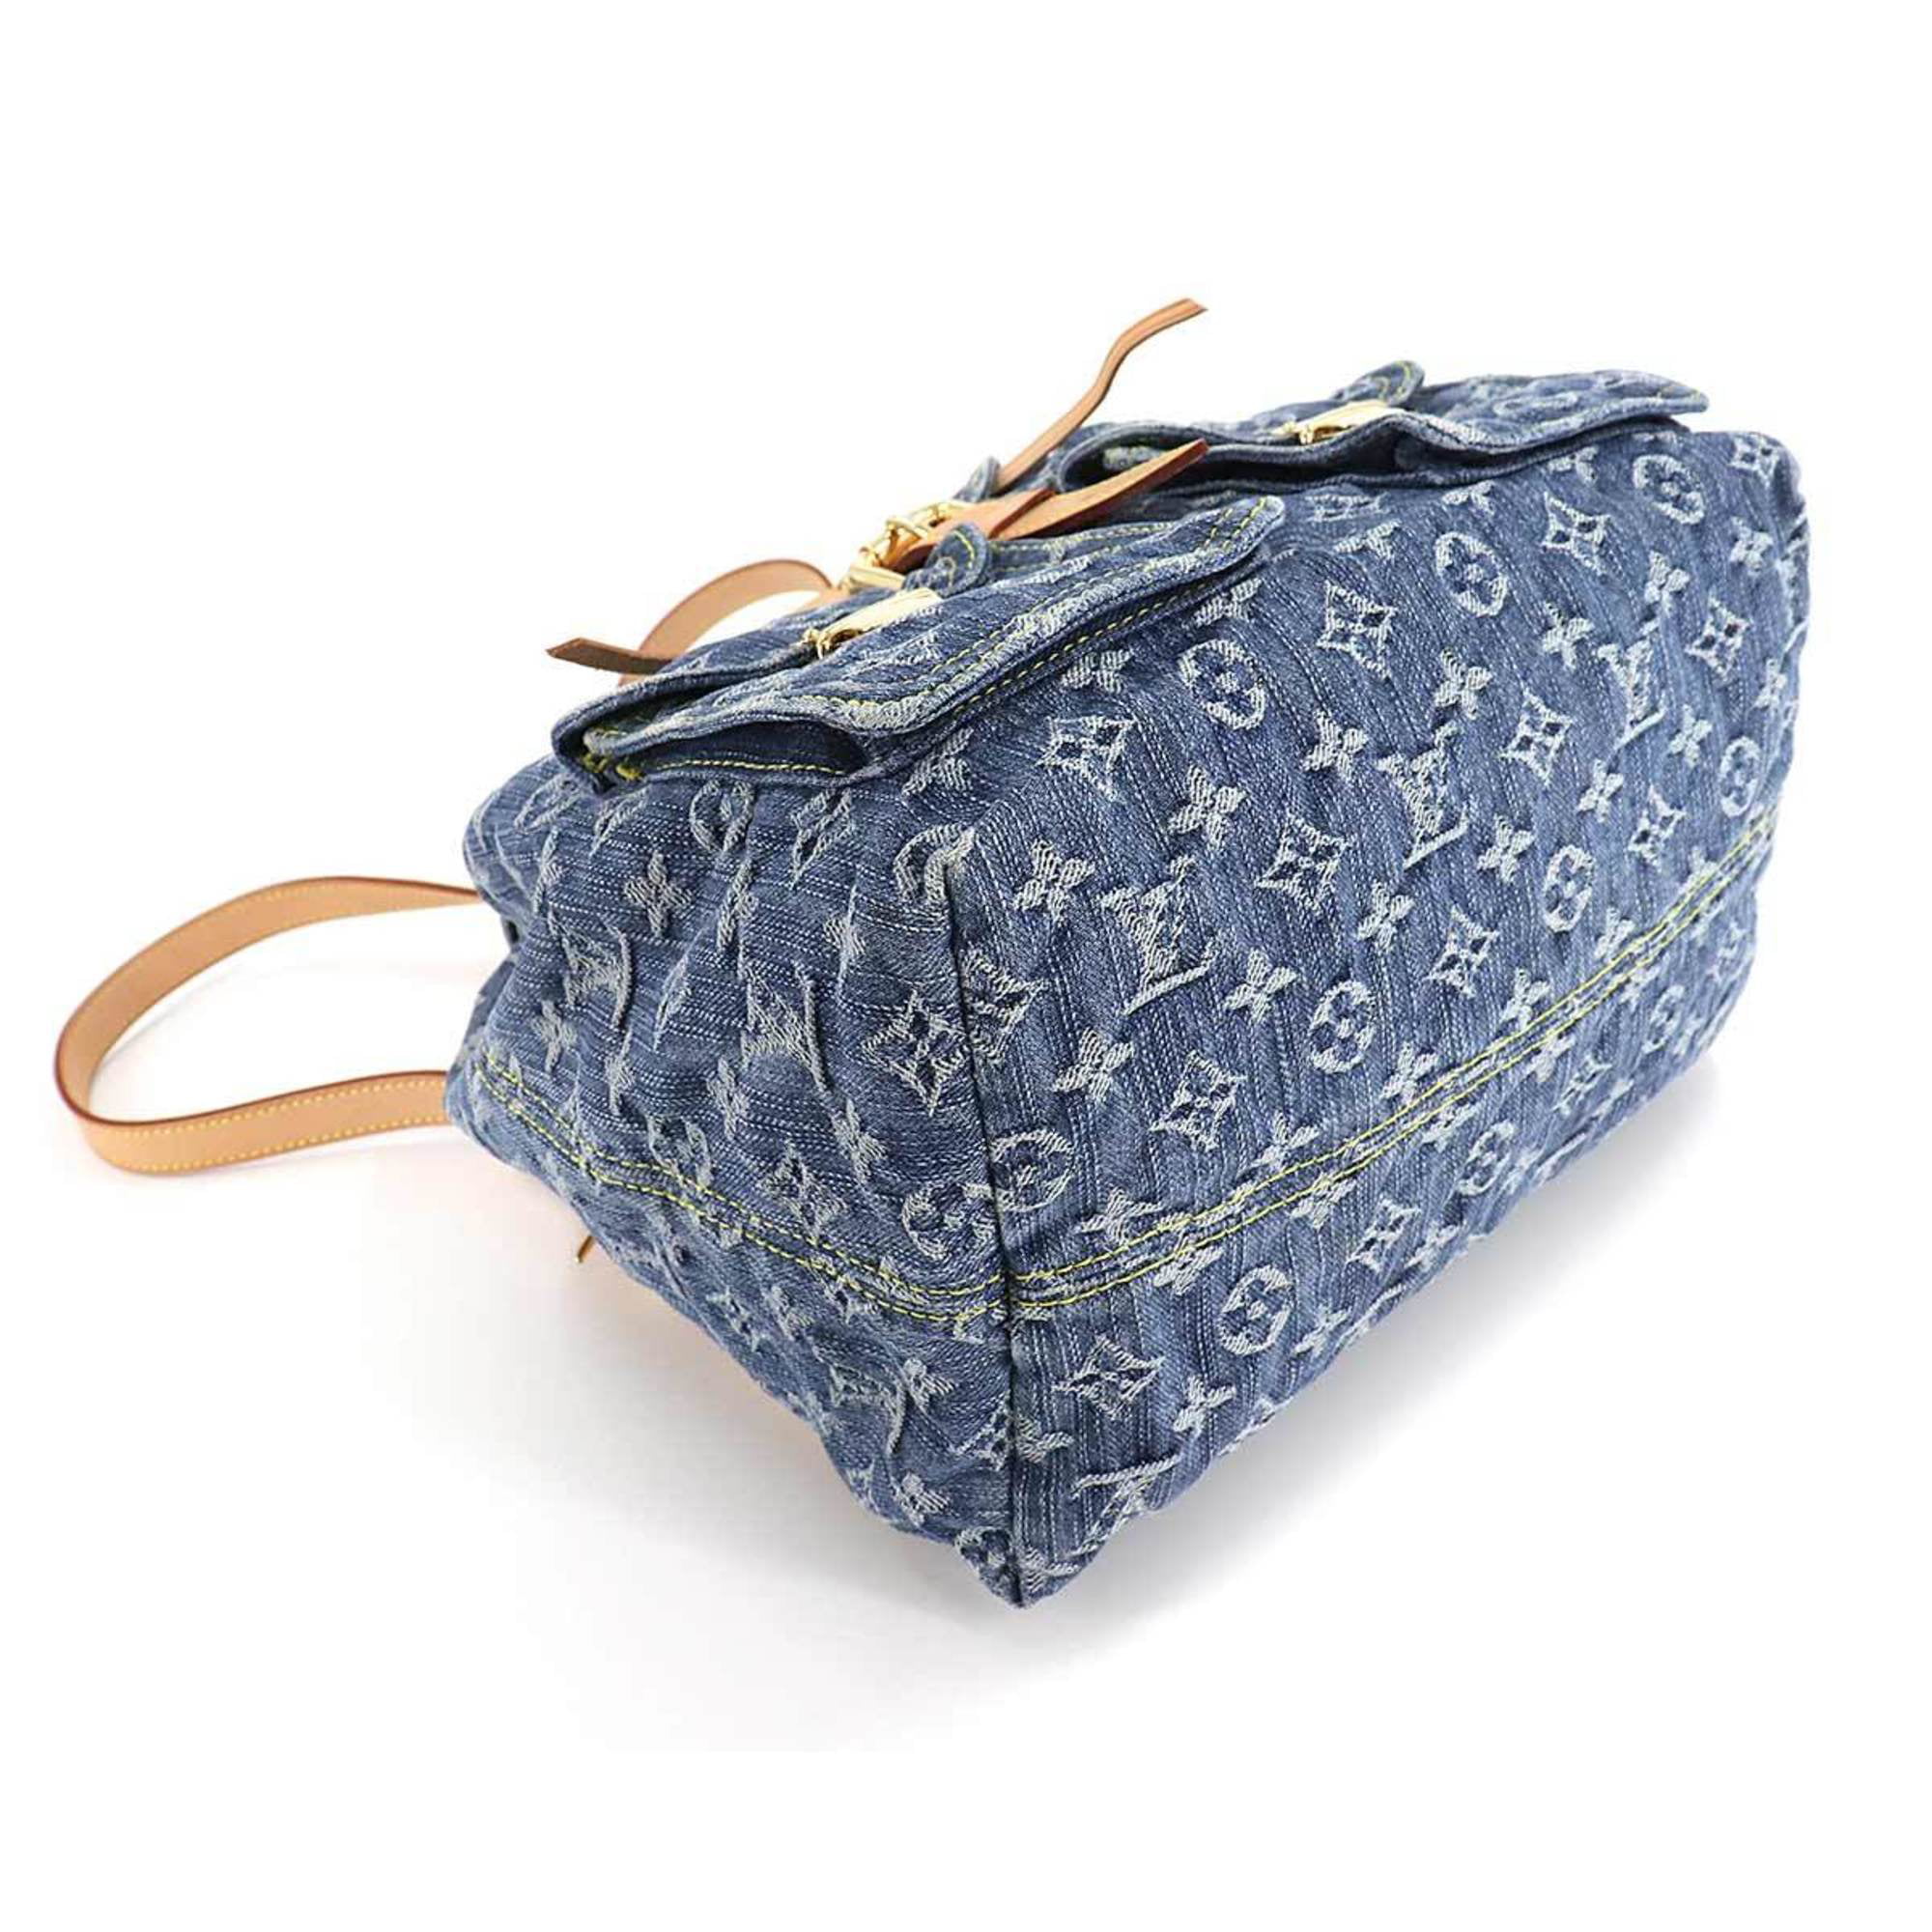 Louis Vuitton 2006 pre-owned Monogram Denim Sac A Dos PM backpack -  ShopStyle